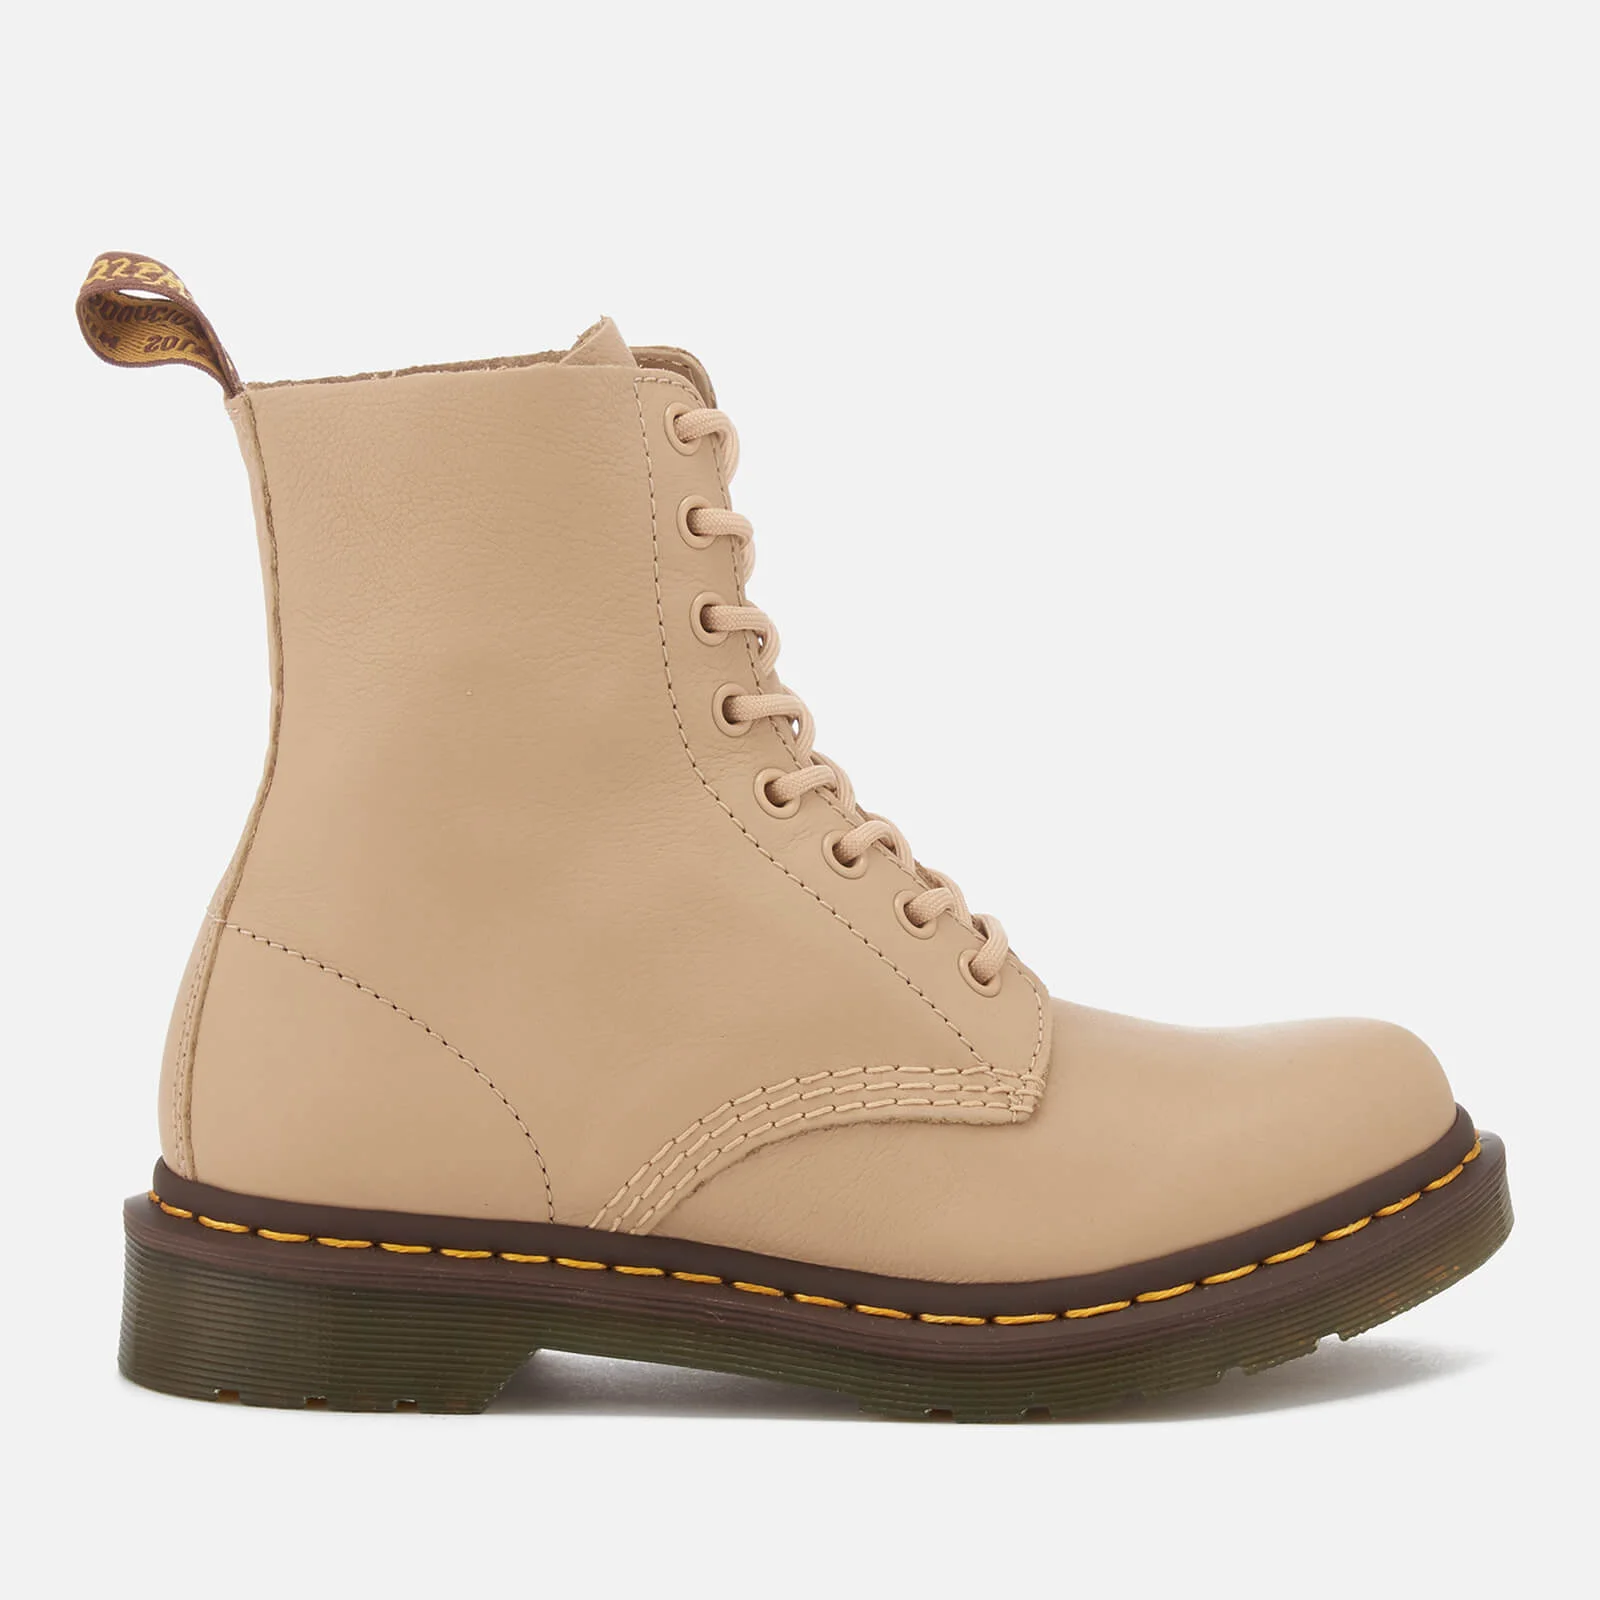 Dr. Martens Women's Pascal 8-Eye Virginia Leather Boots - Nude Image 1